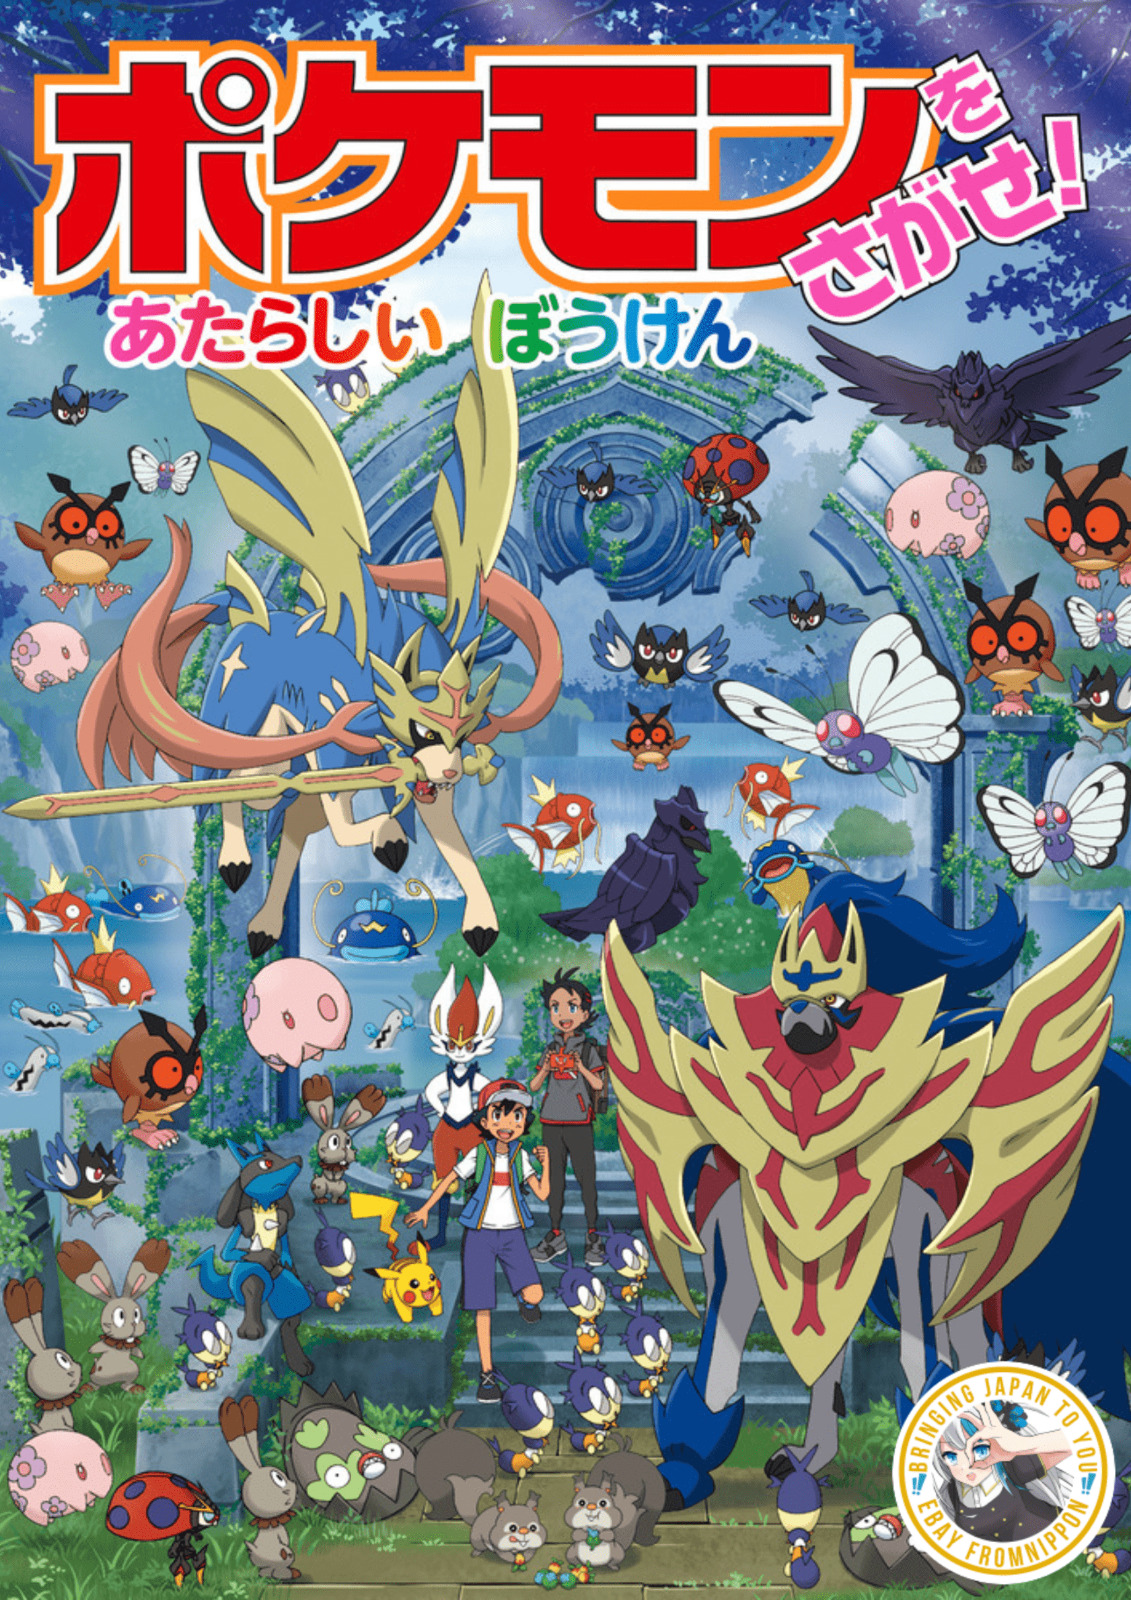 Let`s Find Pokemon #1-14 Japanese Picture book For Kids Sold Individually